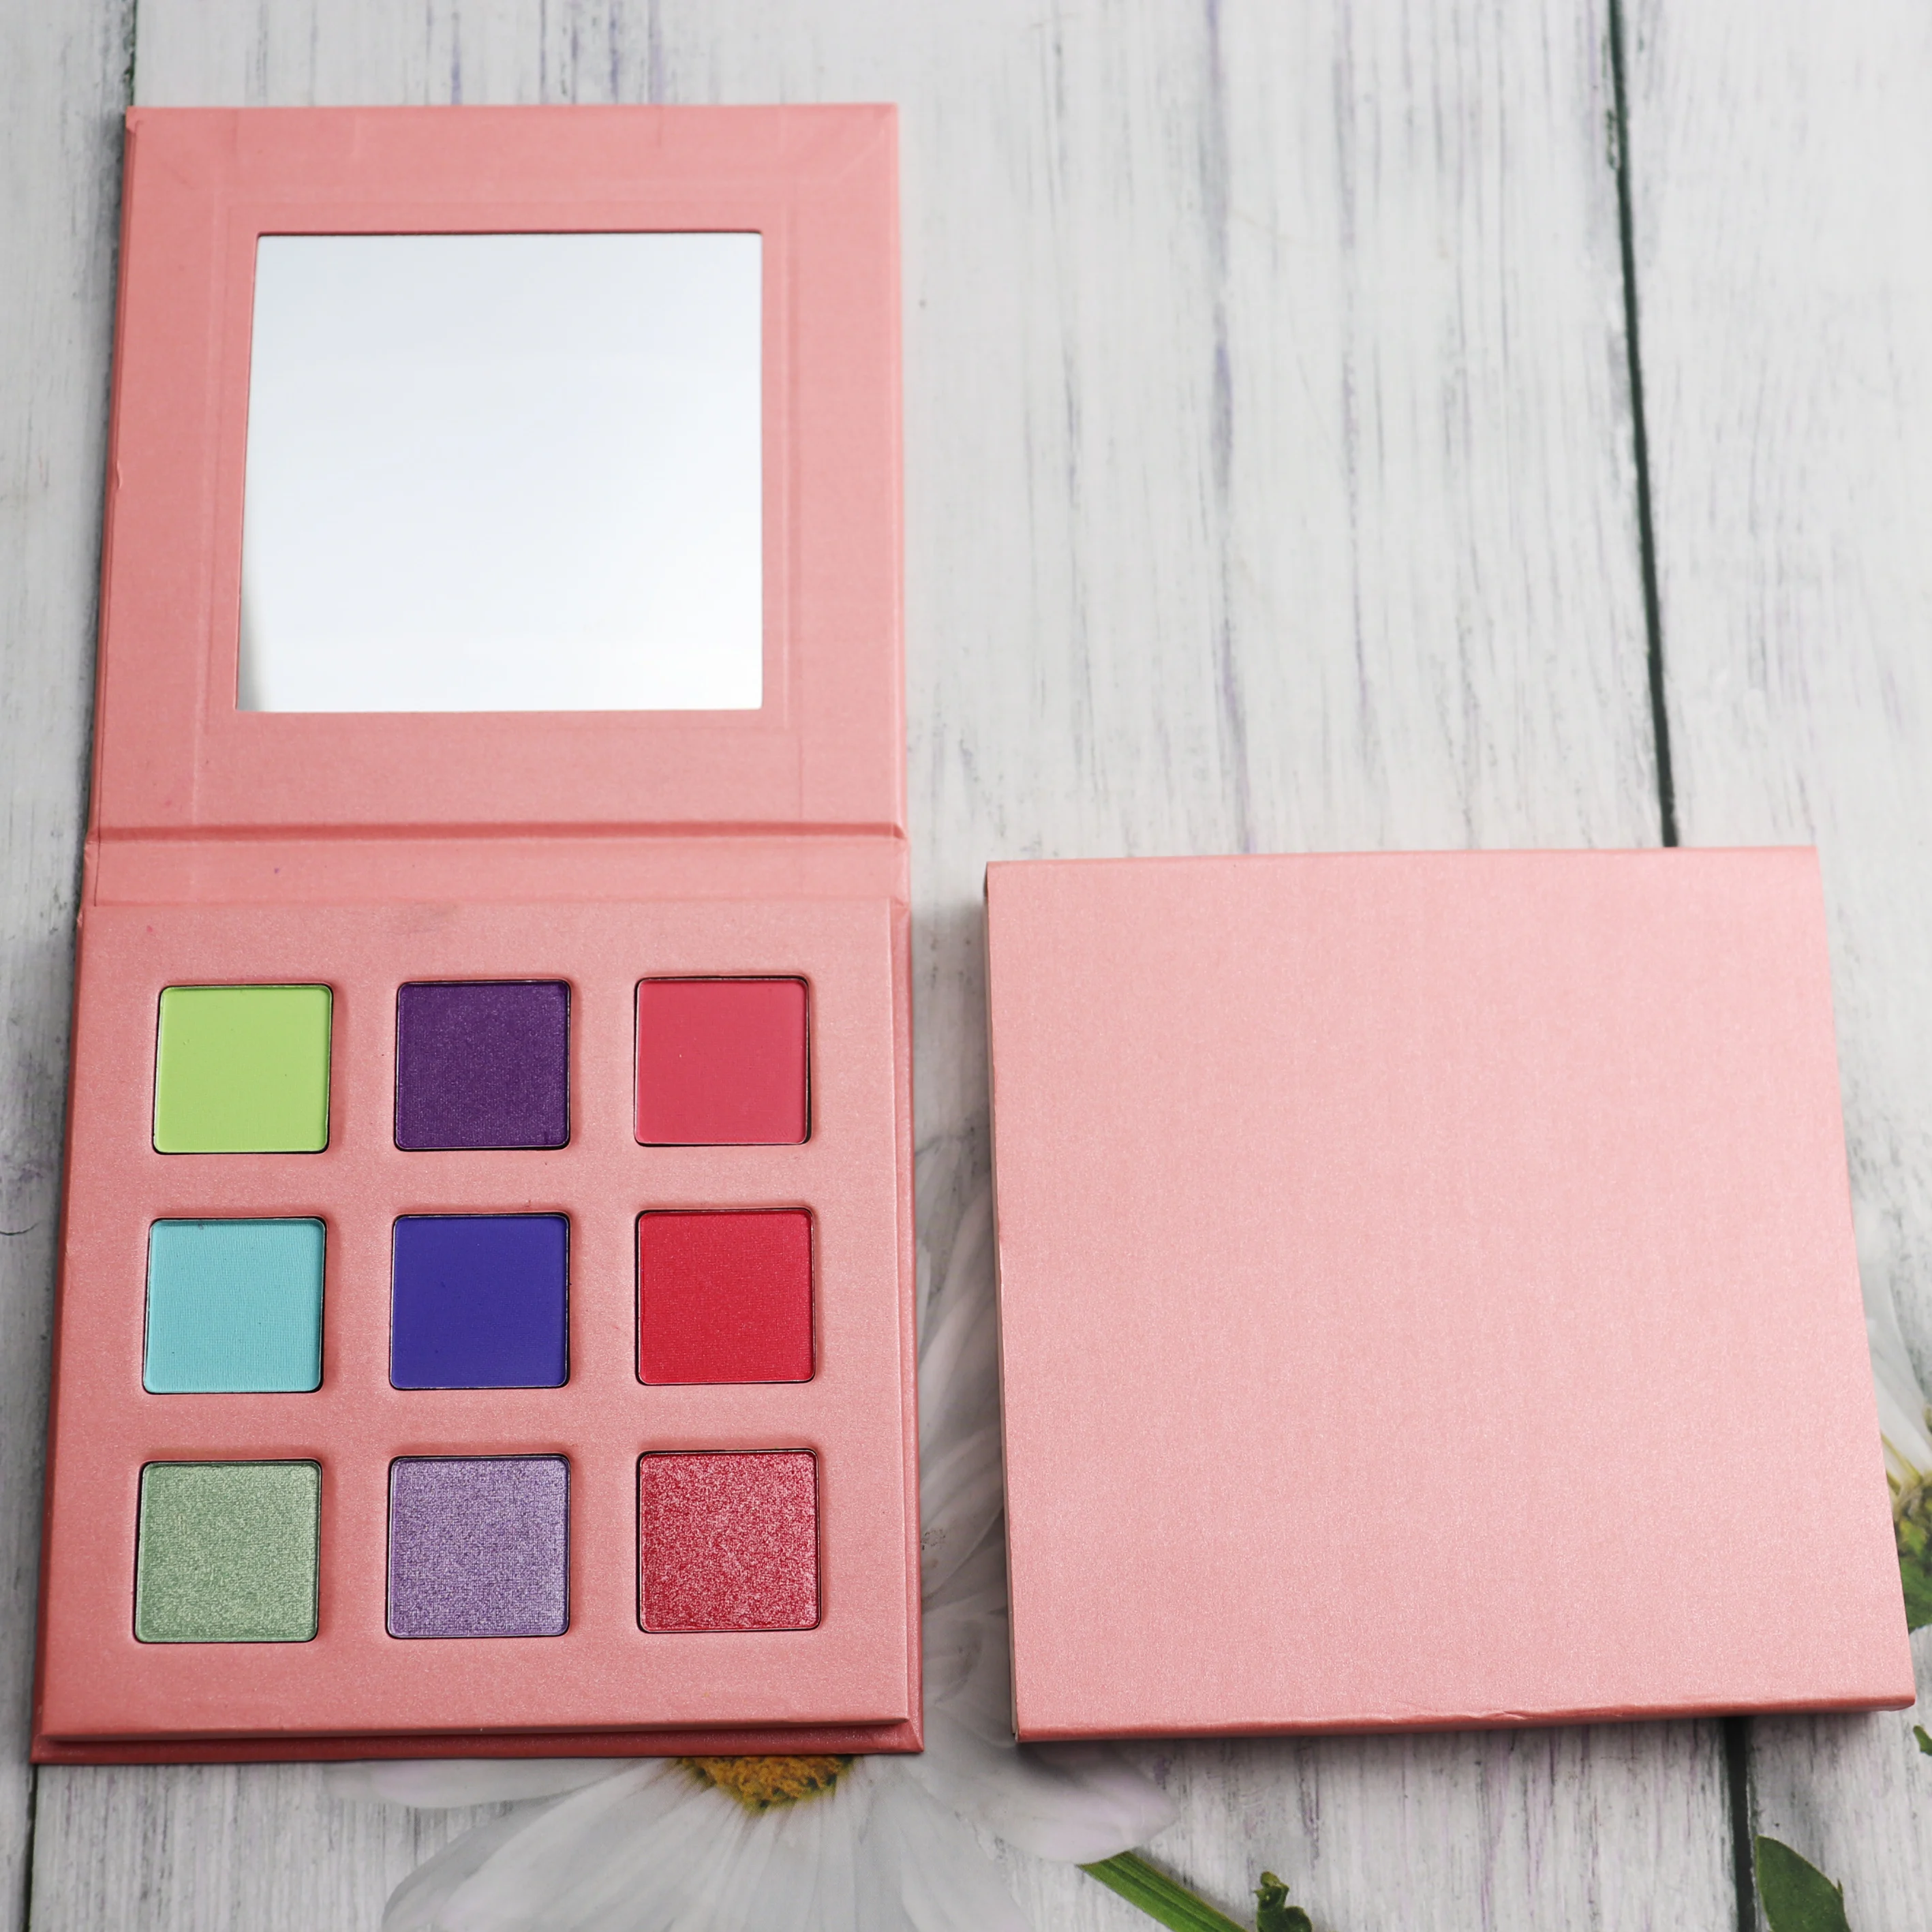 

Brand new anastasia beverly hills Square eyeshadow Makeup custom pink Eyeshadow palette no logo private label, 9 colors